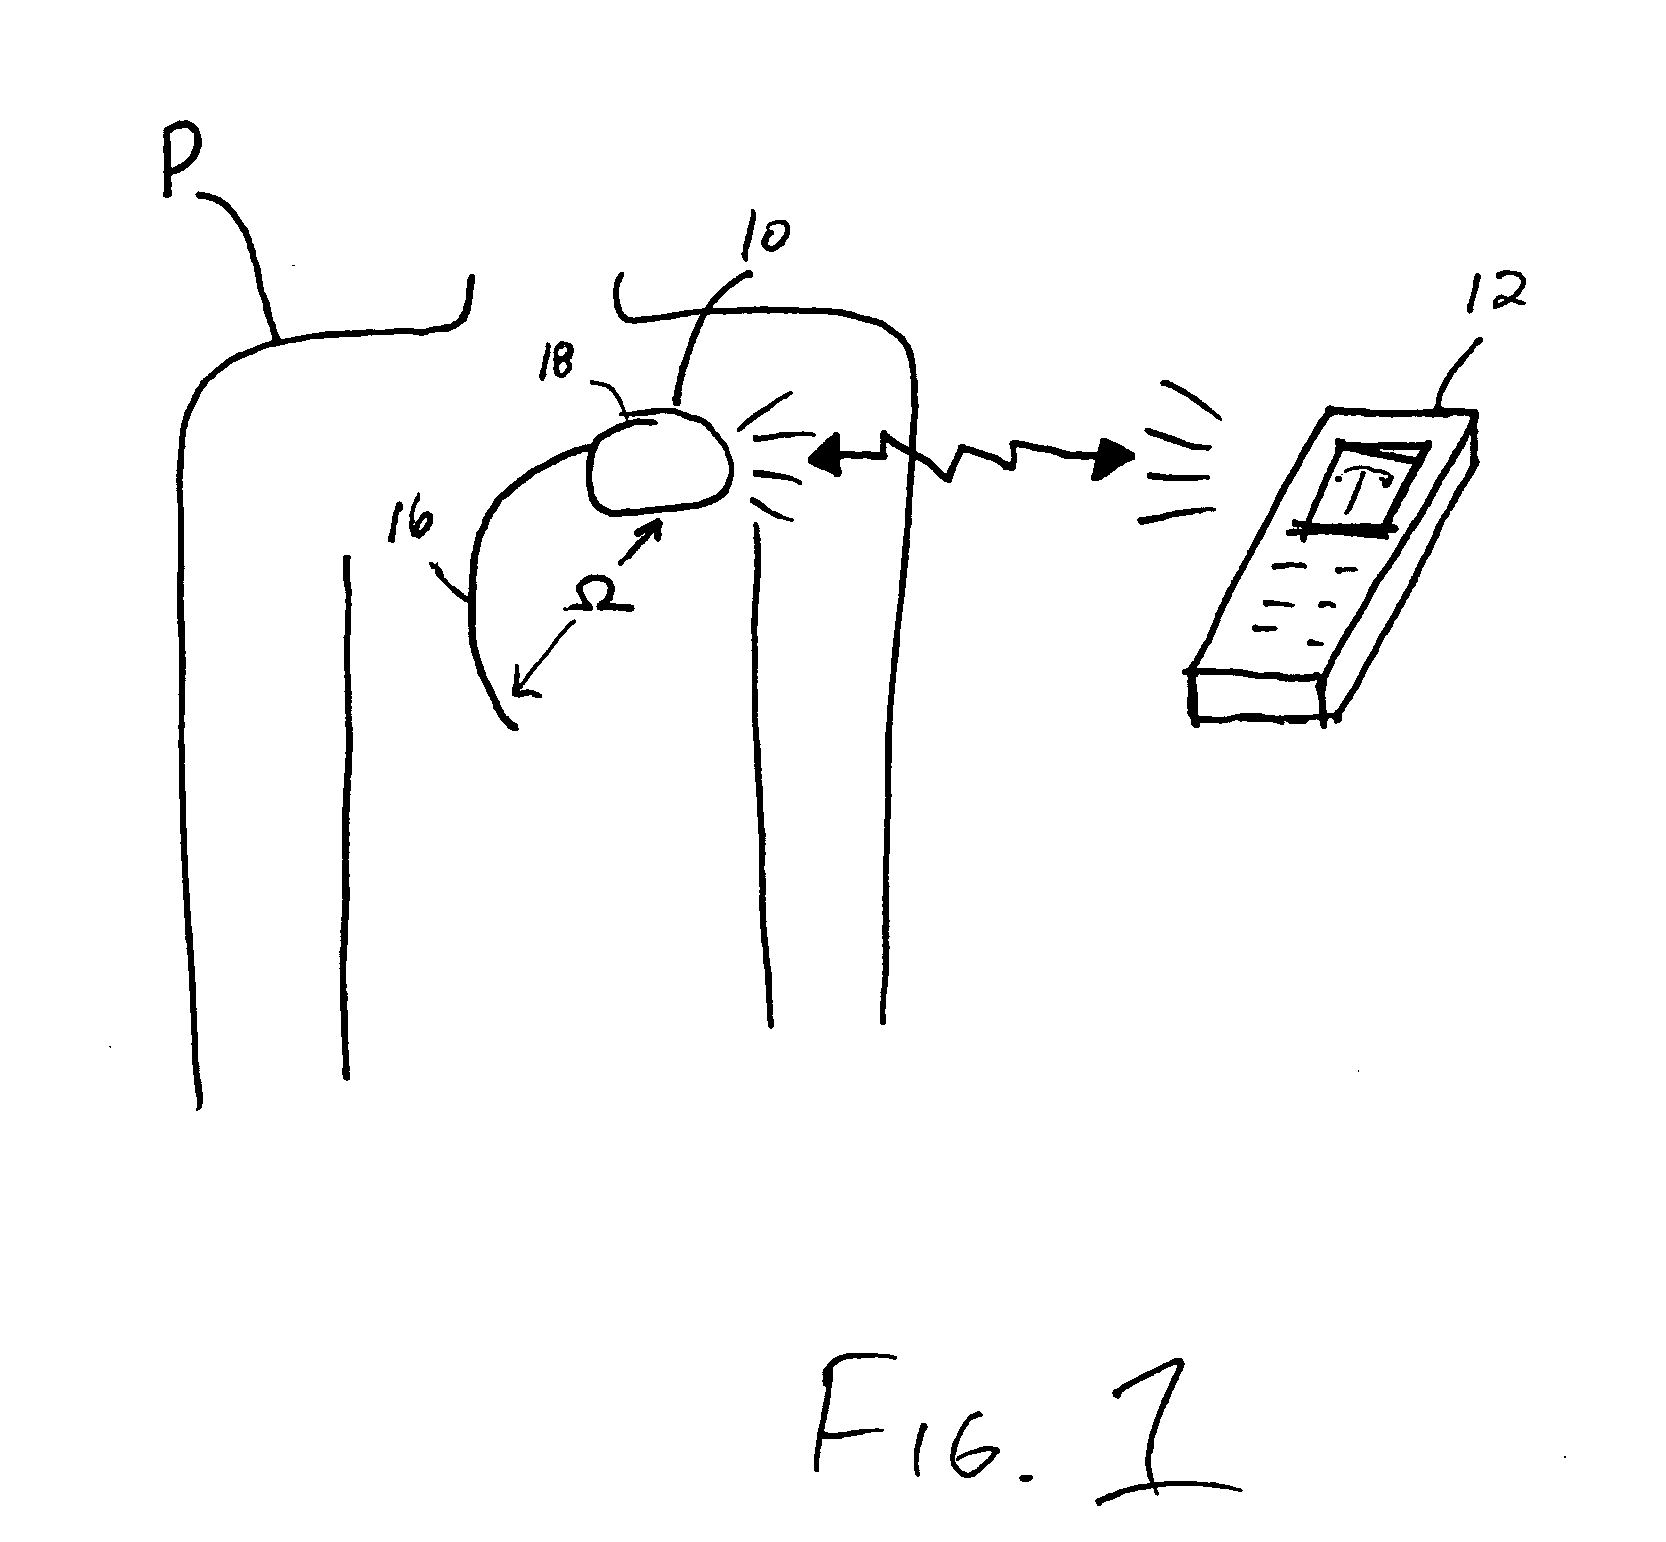 Edema monitoring system and method utilizing an implantable medical device